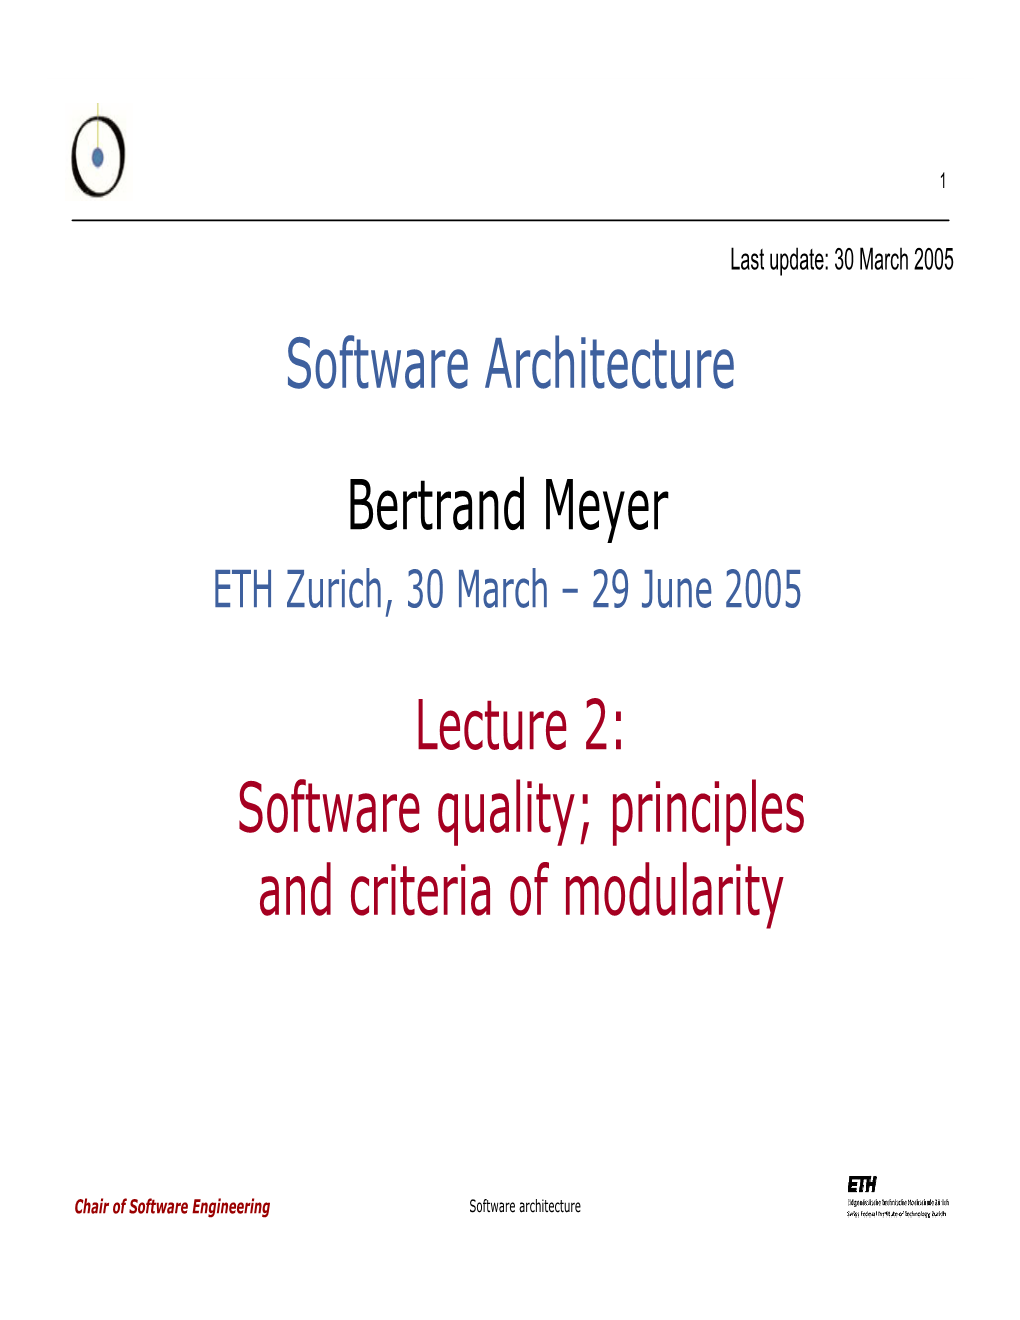 Software Architecture Bertrand Meyer Lecture 2: Software Quality